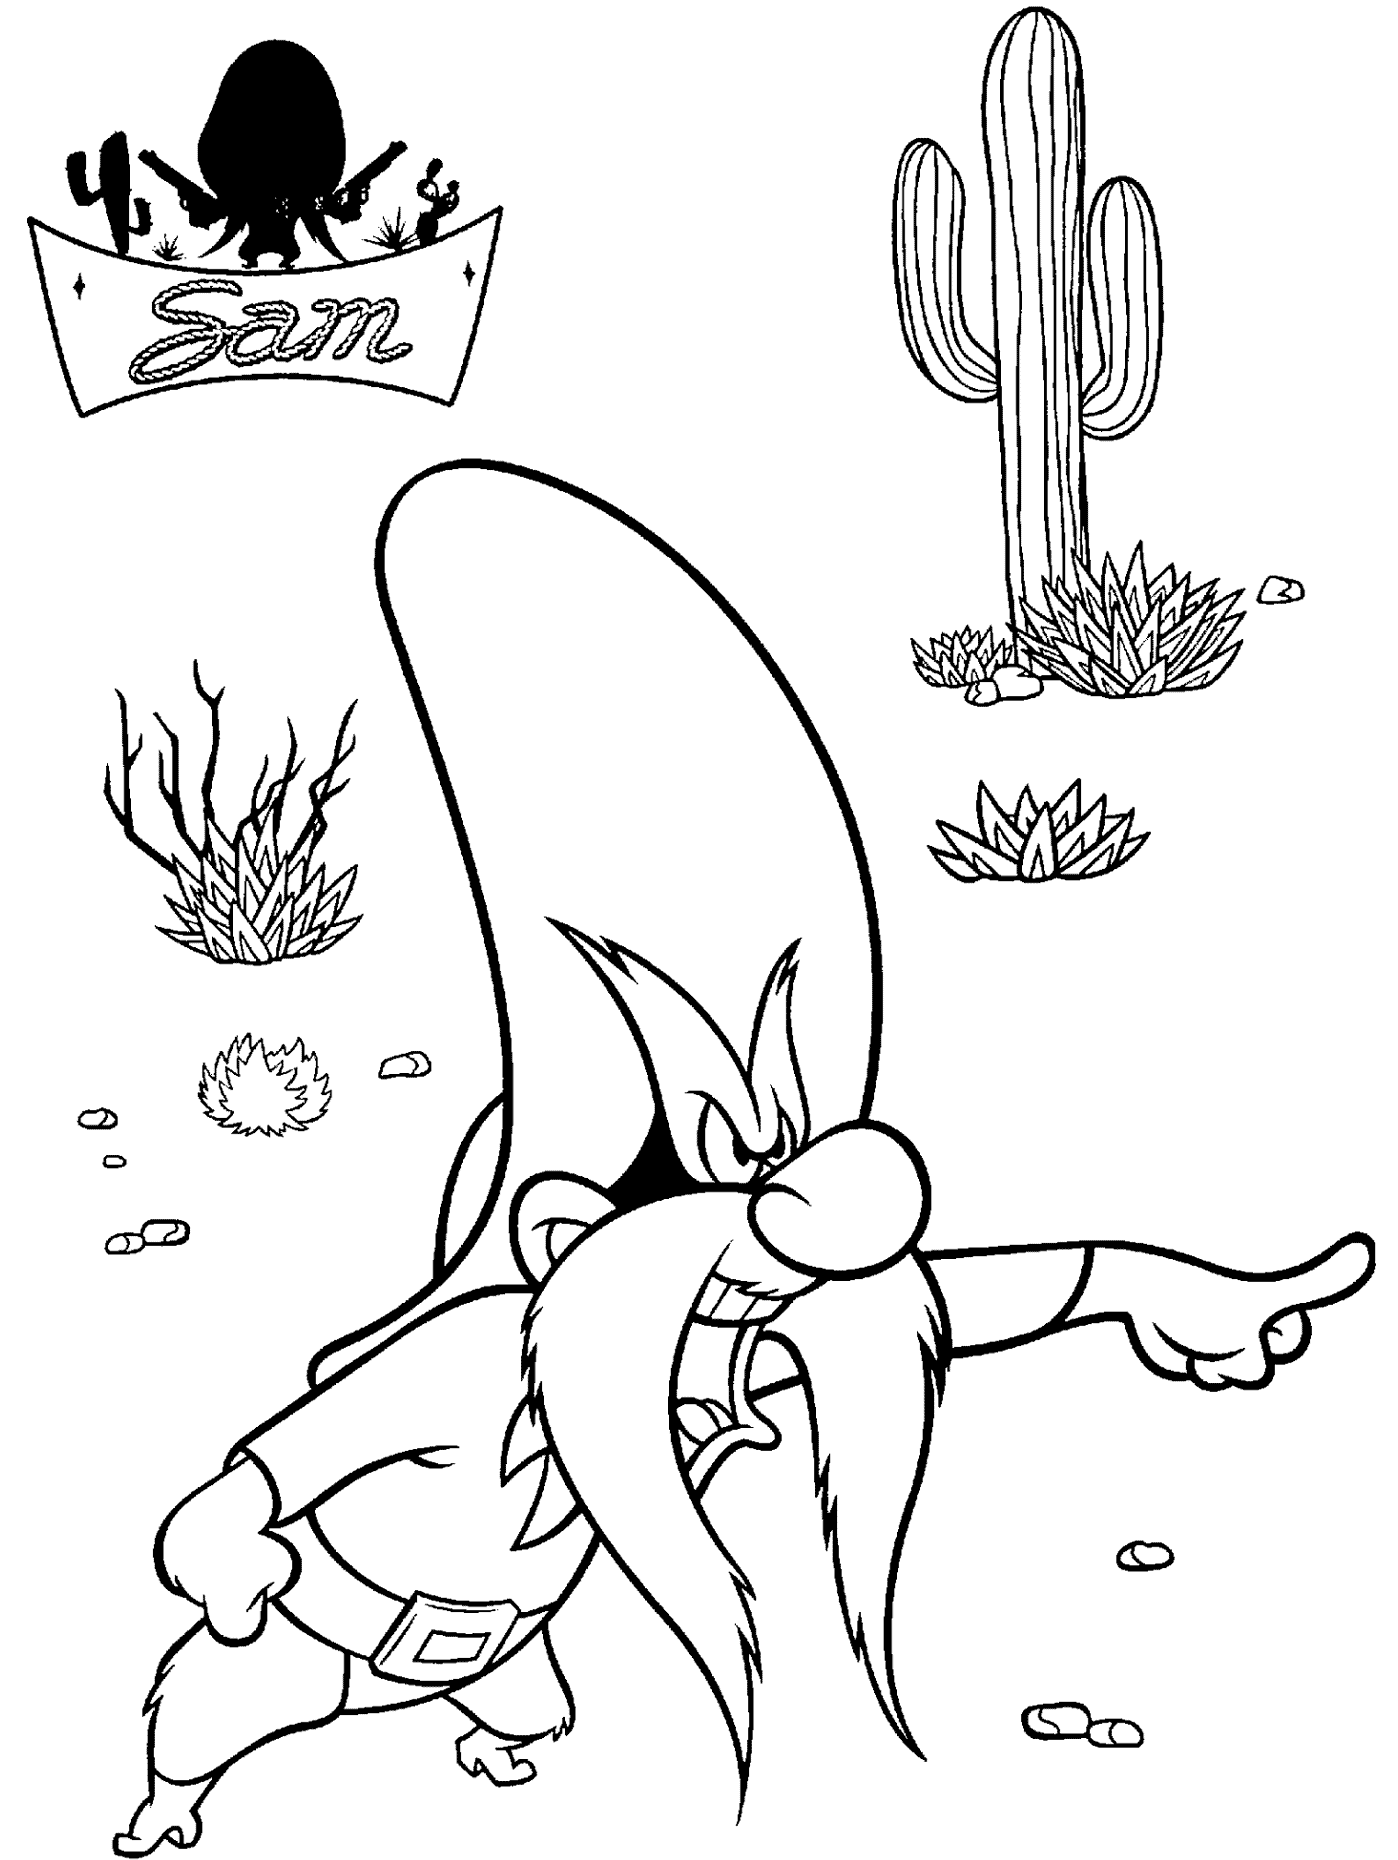 Looney Tunes Coloring page : LOONEY TUNES SPOT COLORING PAGES